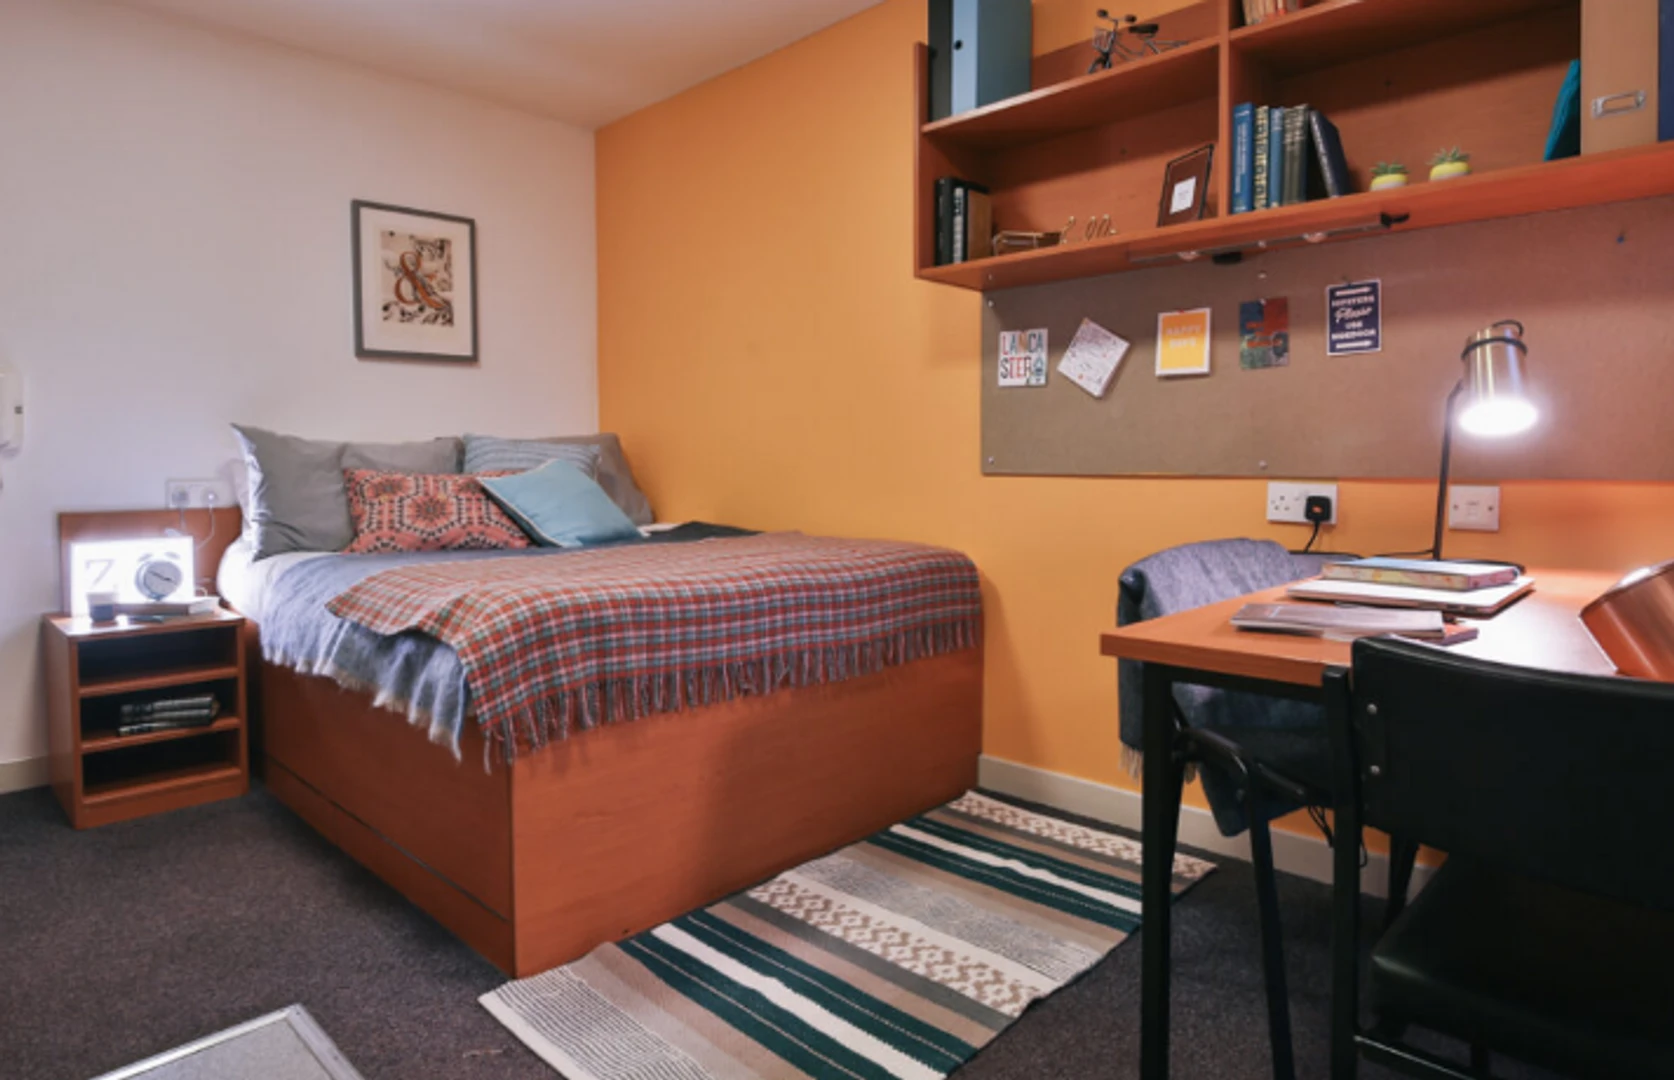 Accommodation in the centre of Lancaster